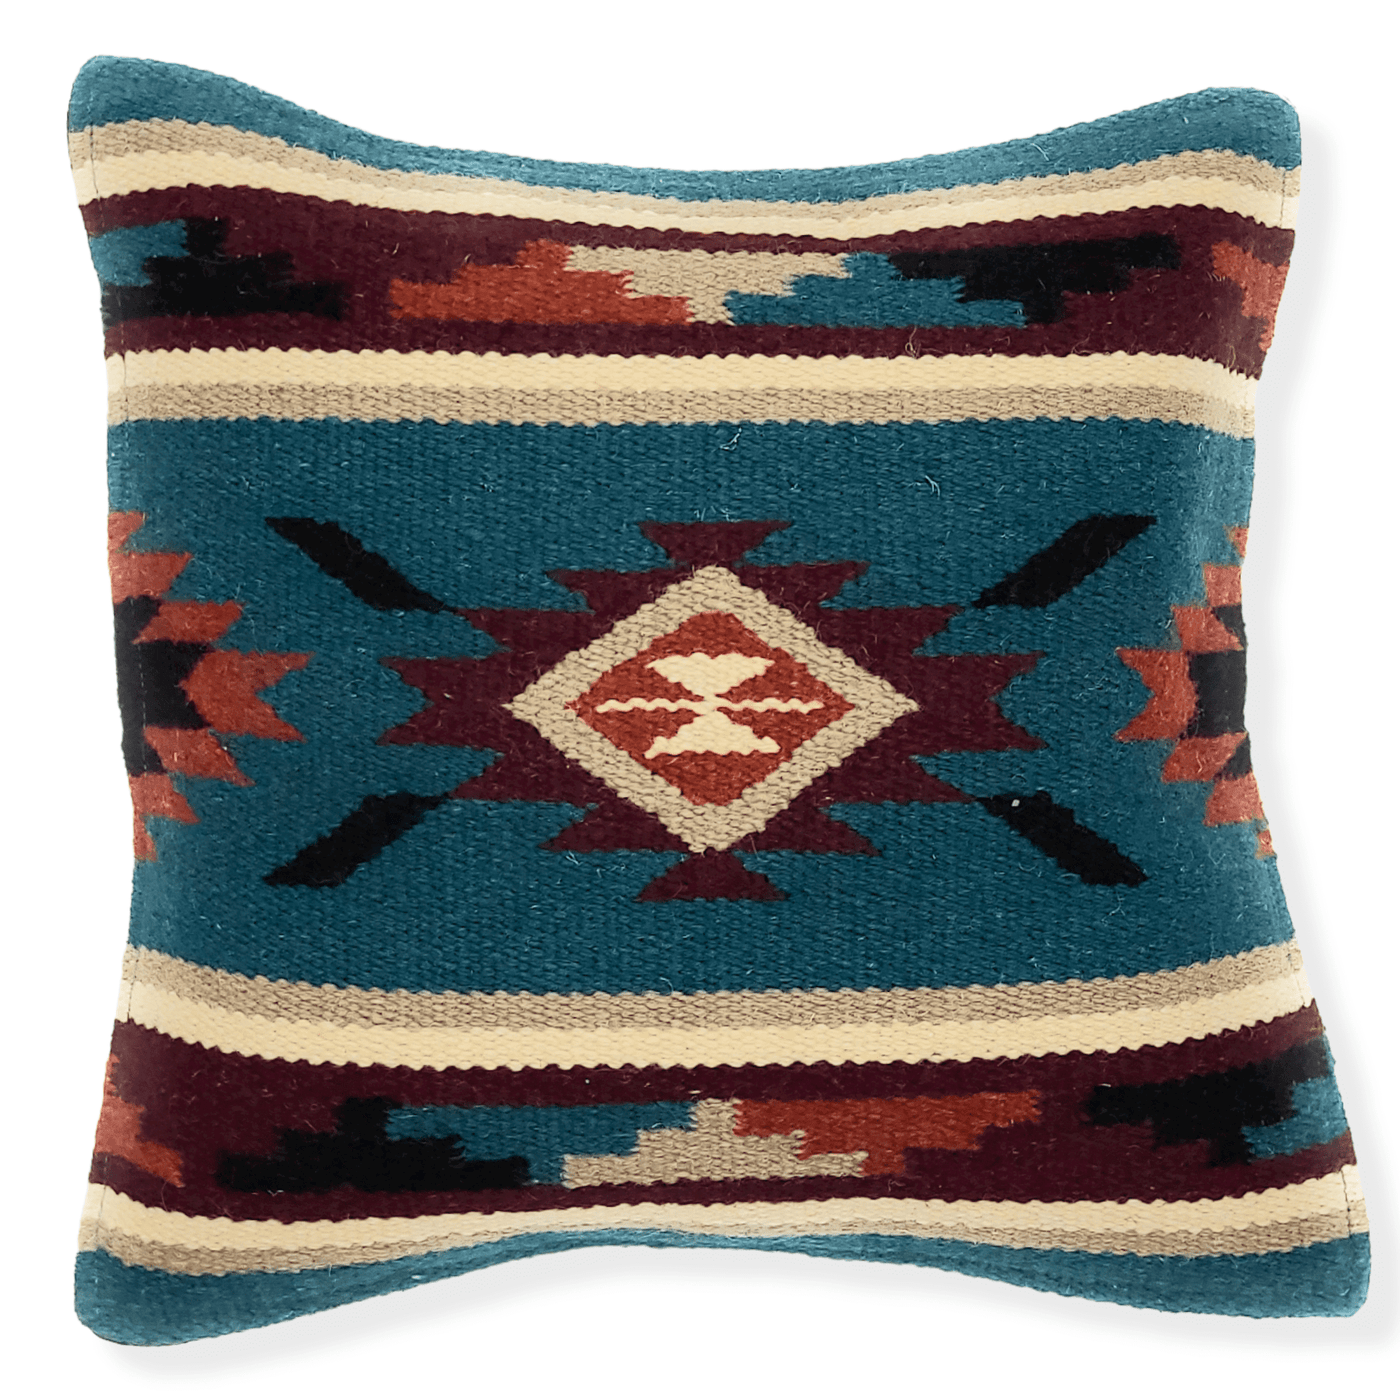 Southwestern Handwoven Wool Pillow Covers- The Pueblo 20 Assorted Colors- 18 X 18 Throw Pillow - Ranch Junkie Mercantile LLC